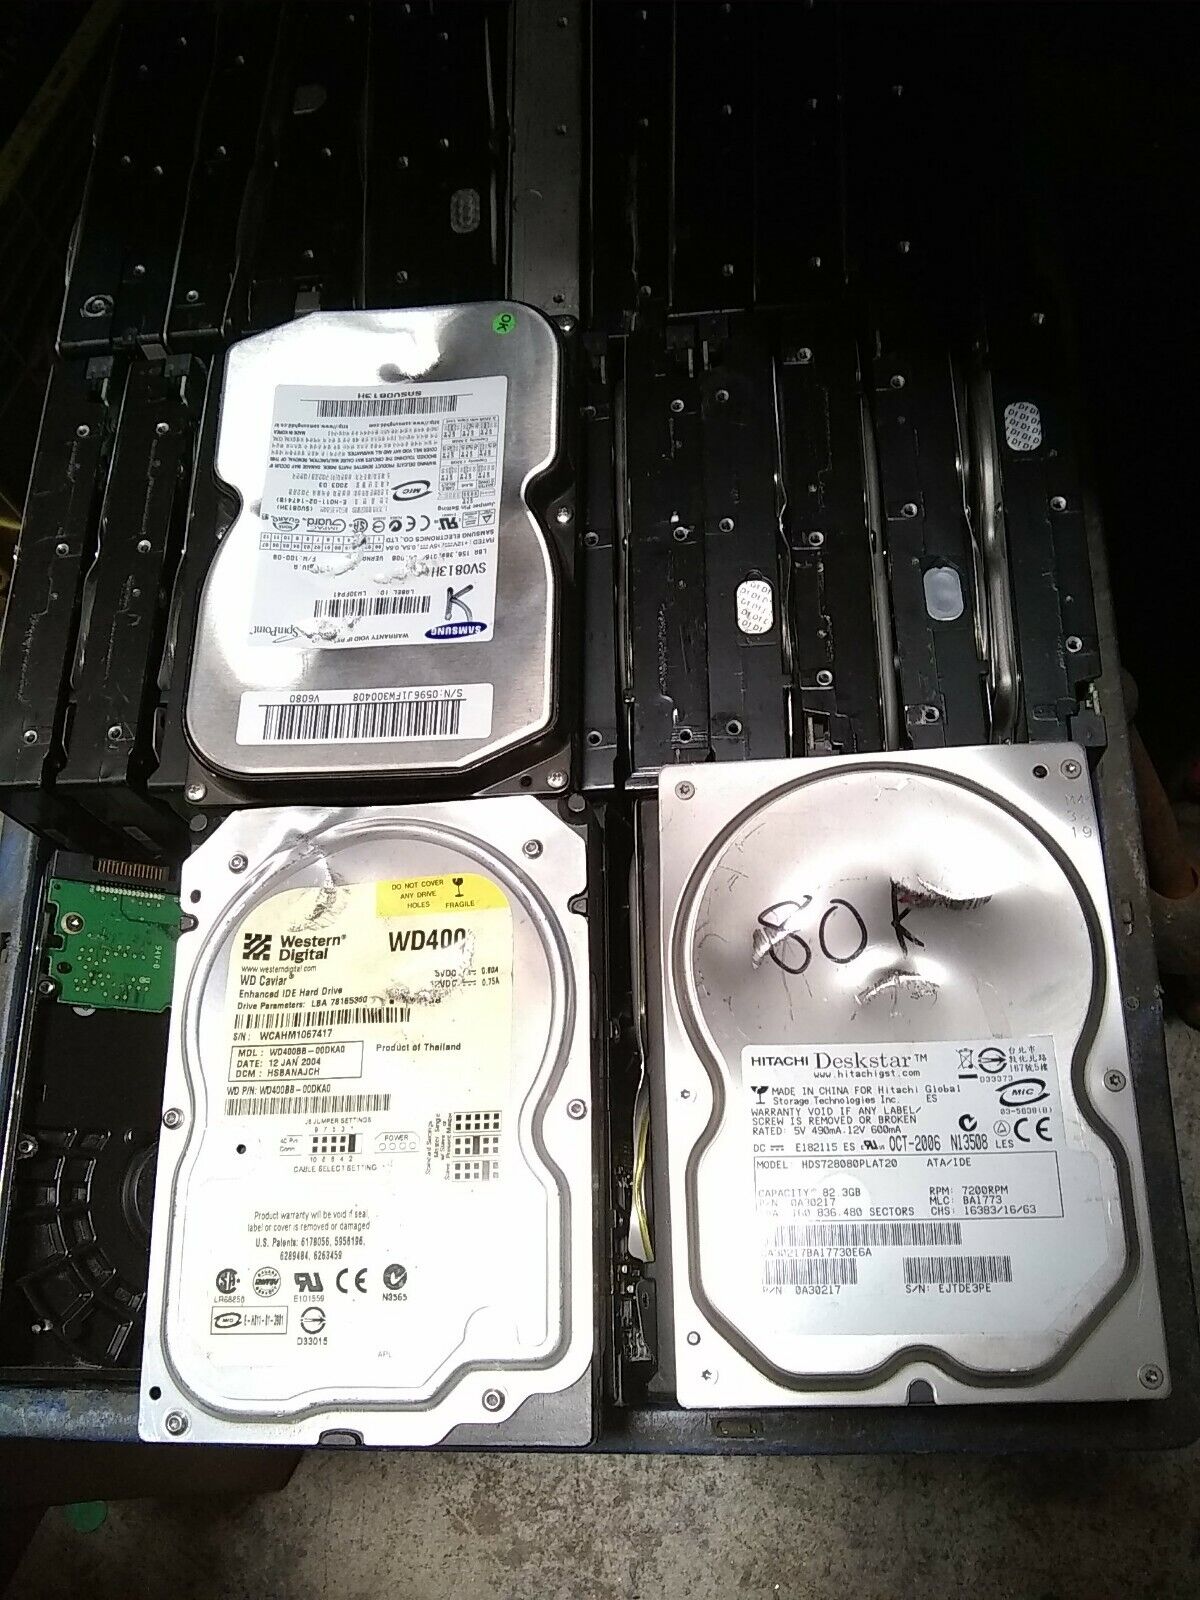 Lot of 17 Computer Hard Drives Scrap Gold Platinum Recovery or Used Parts